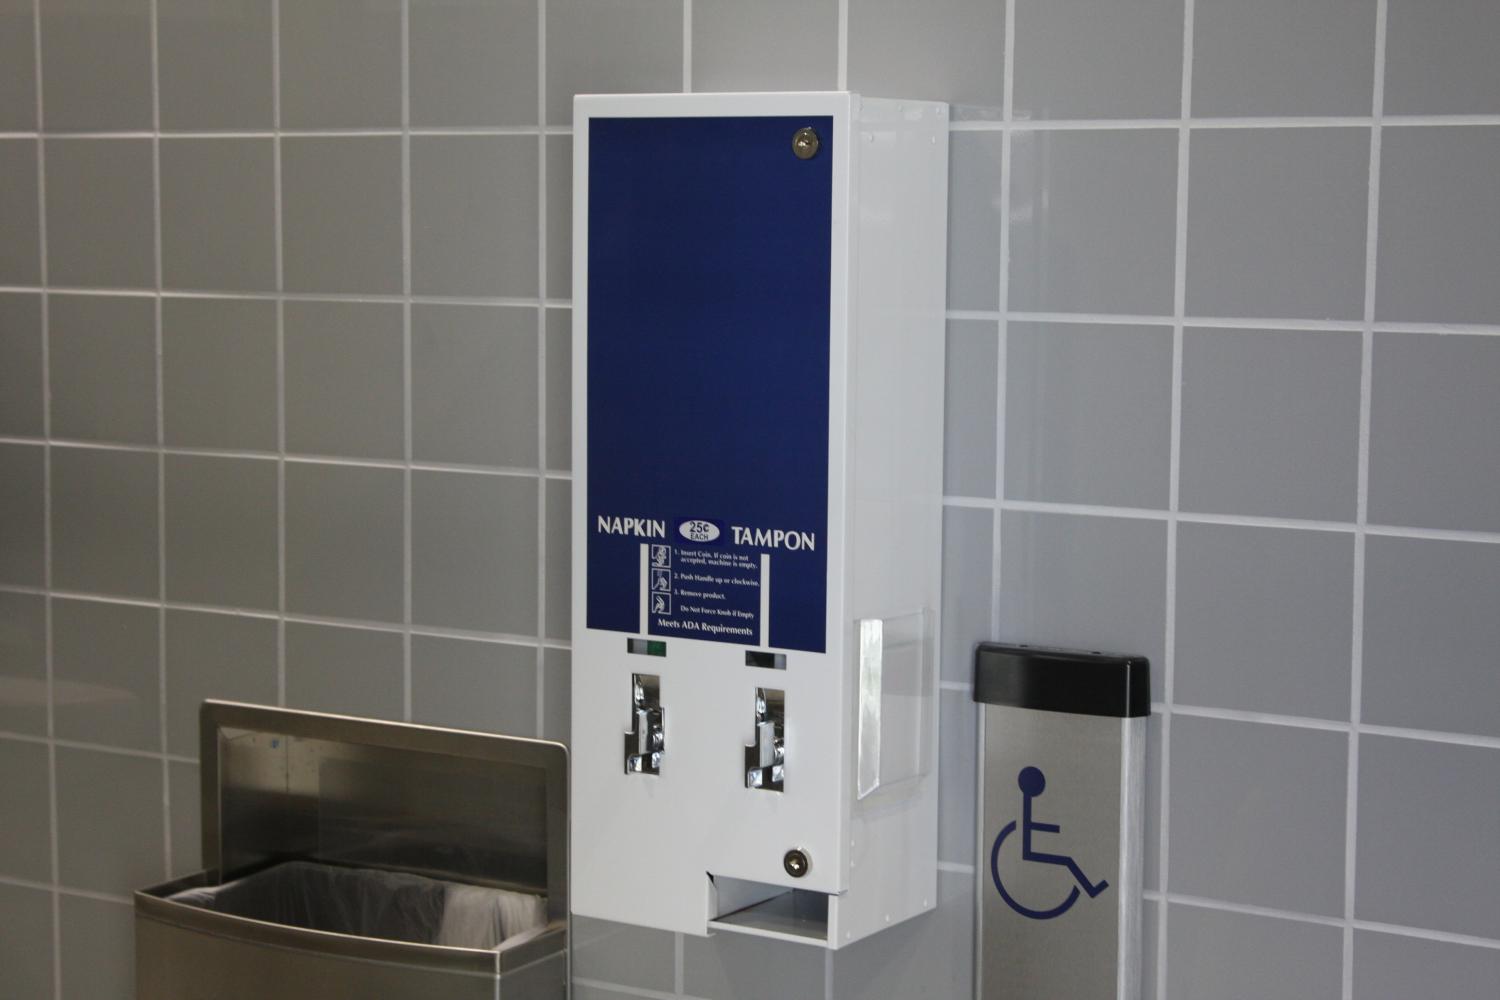 Newly installed tampon and napkin dispenser in the womens restroom of the Fine Arts Building on the second floor. All womens restroom should have dispensers according to Vice President of Student Services Dr. Stephen B. Johnson. Photo credit: David Jenkins